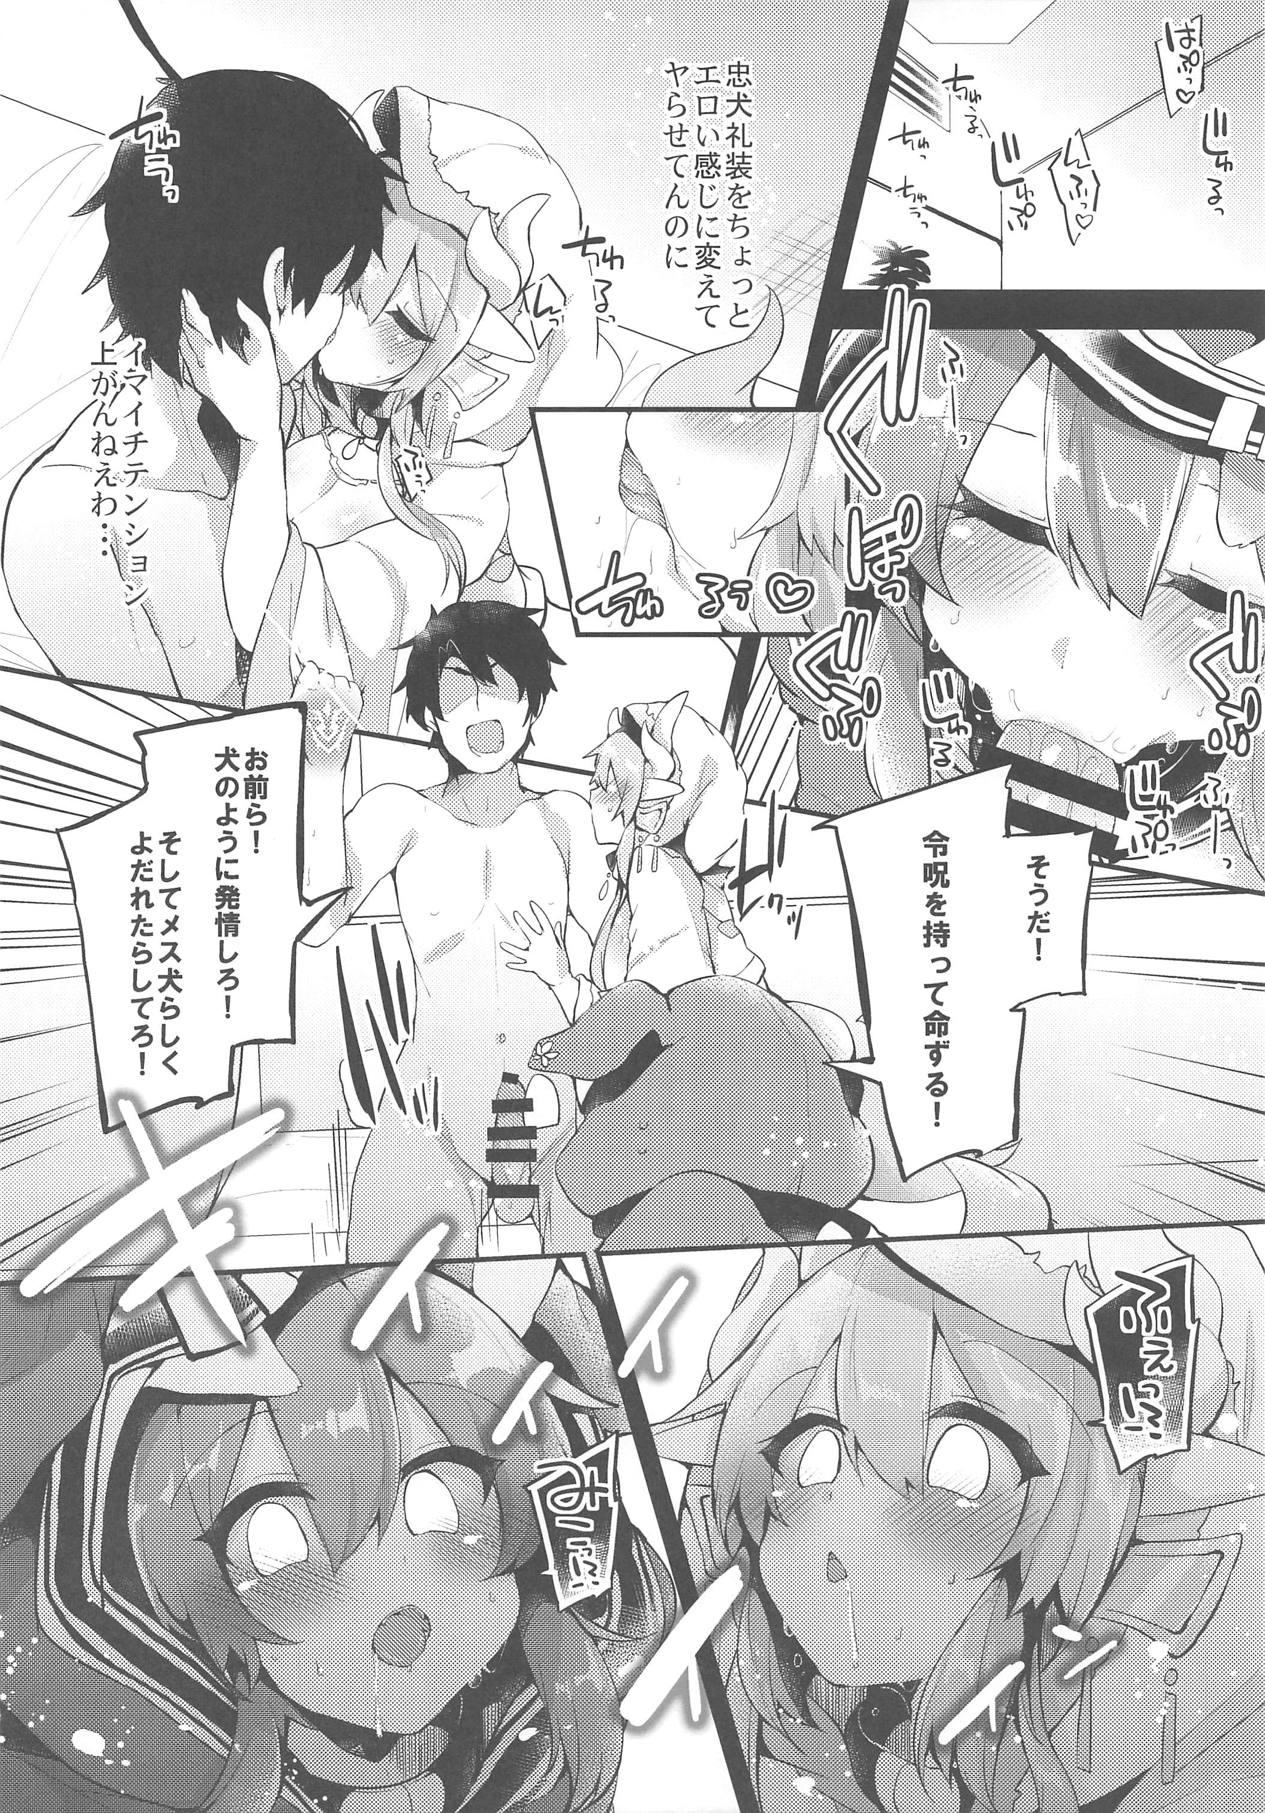 Milf Porn Chuukenx - Fate grand order Sixtynine - Page 2